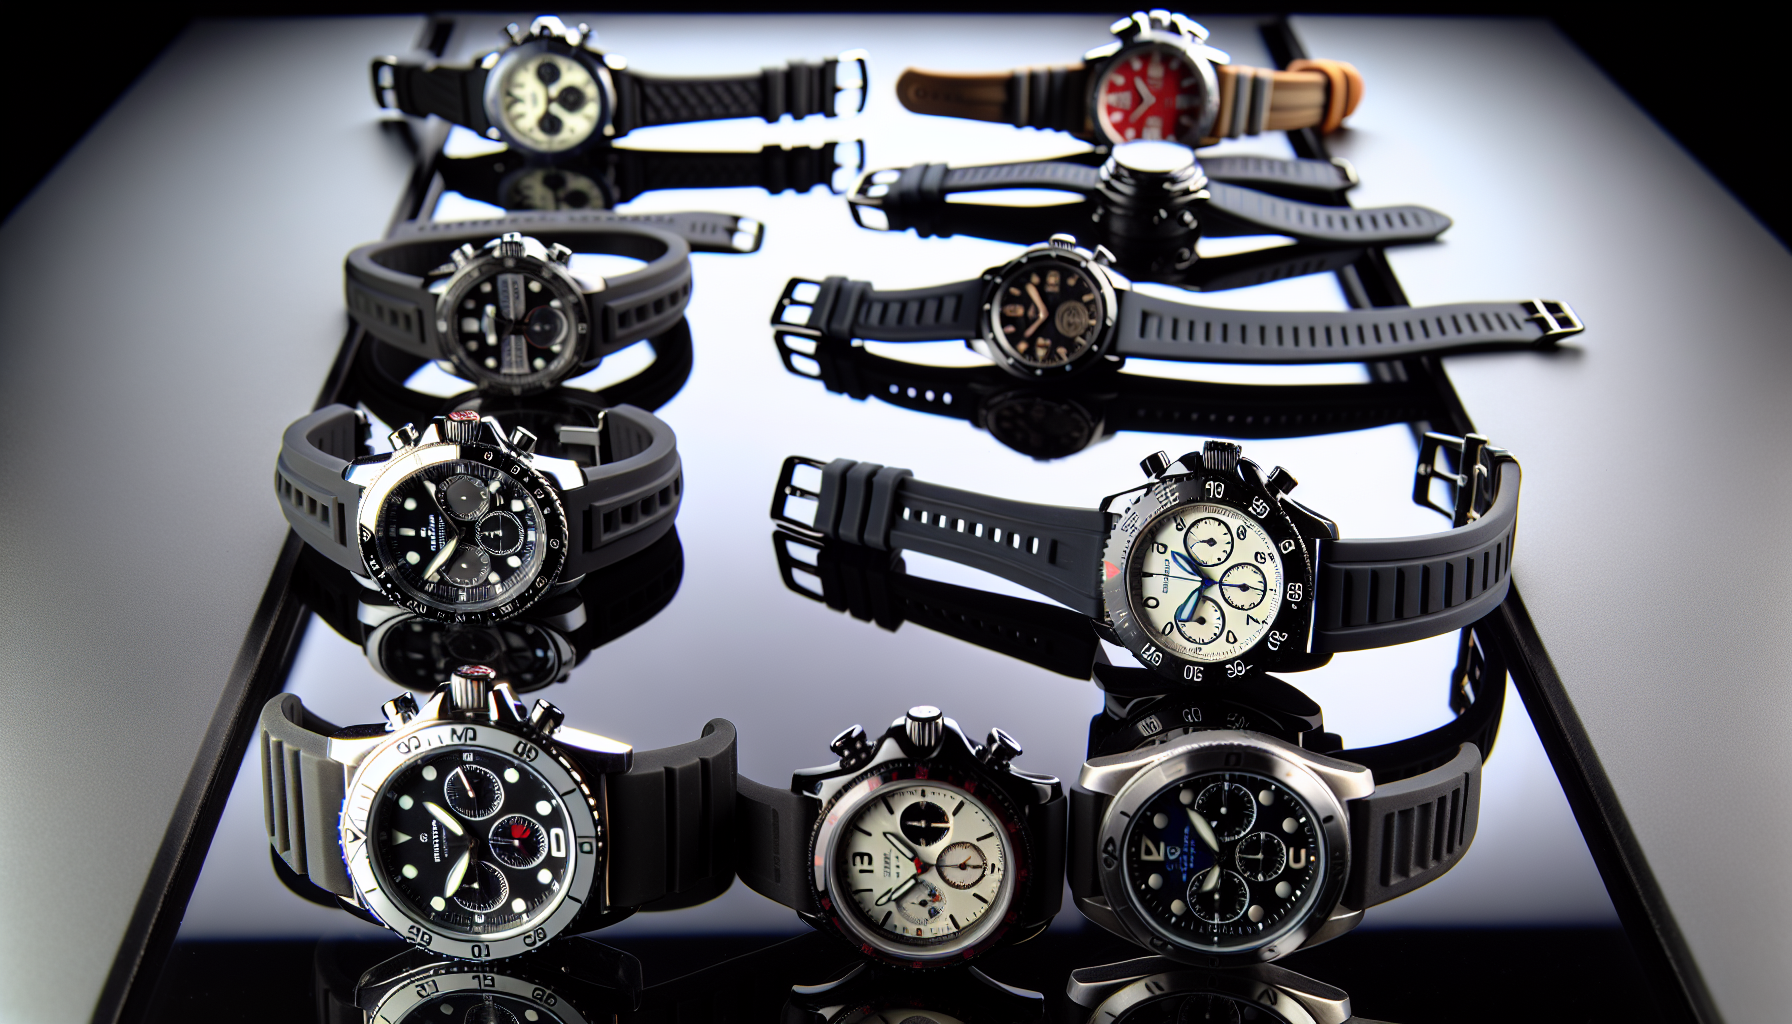 Luxury rubber strap watches from top brands